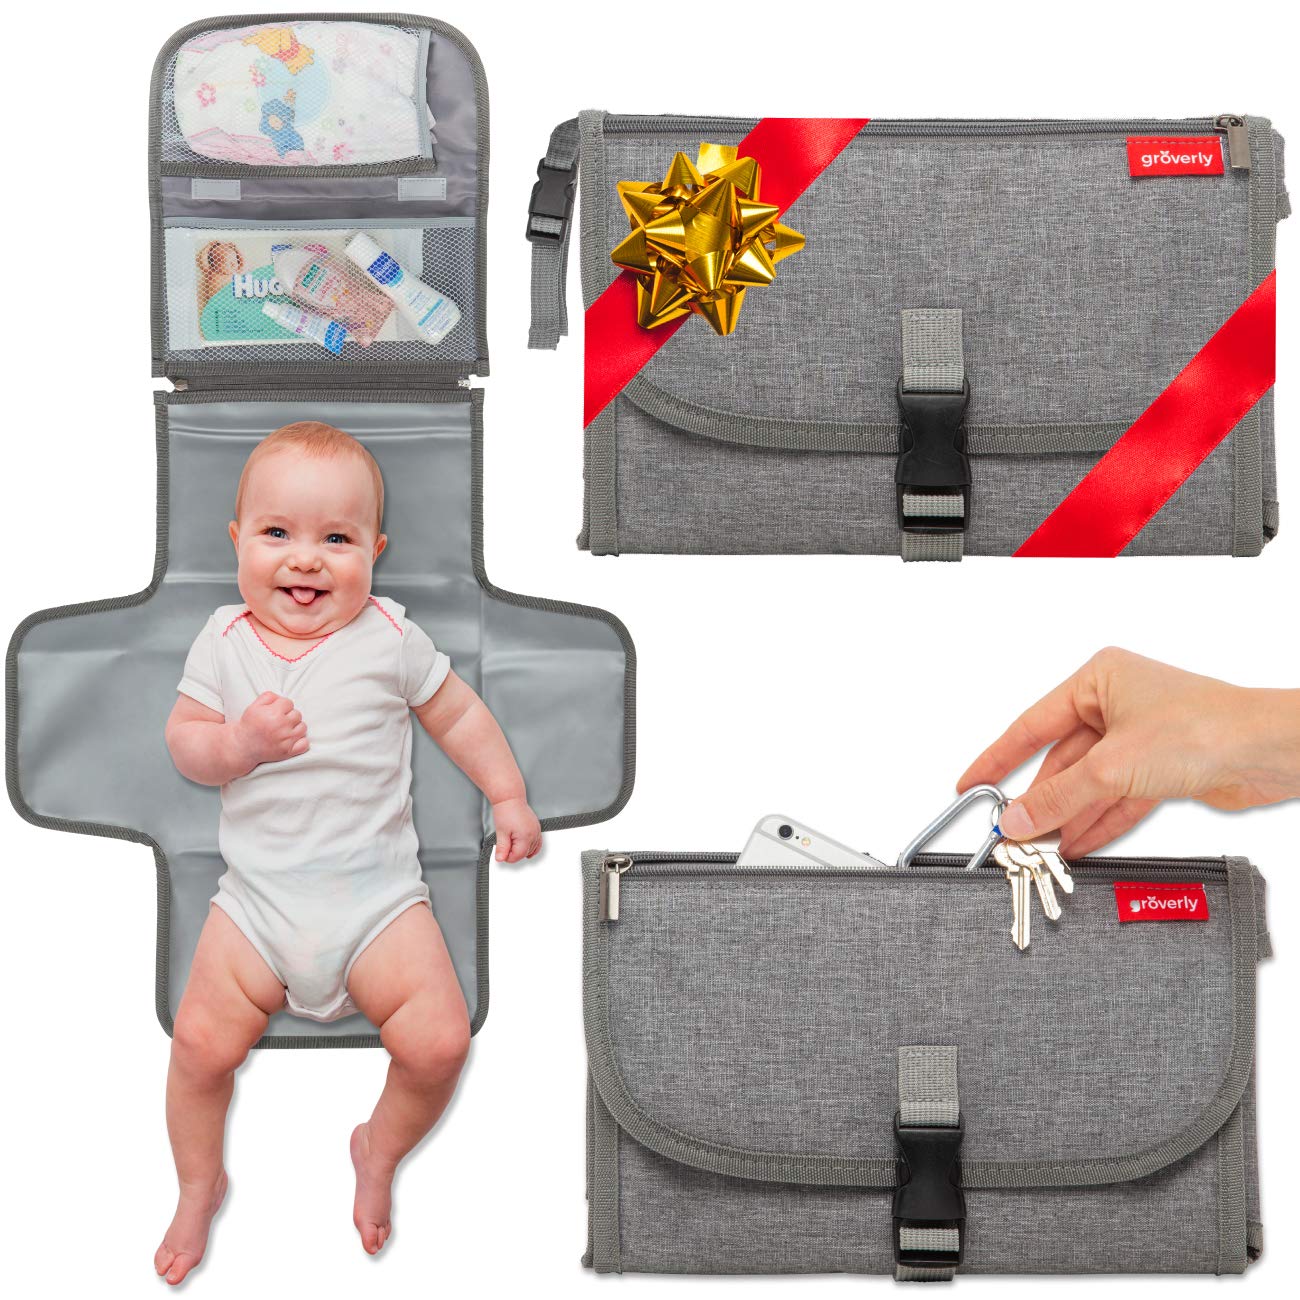 Groverly Portable Diaper Changing Pad